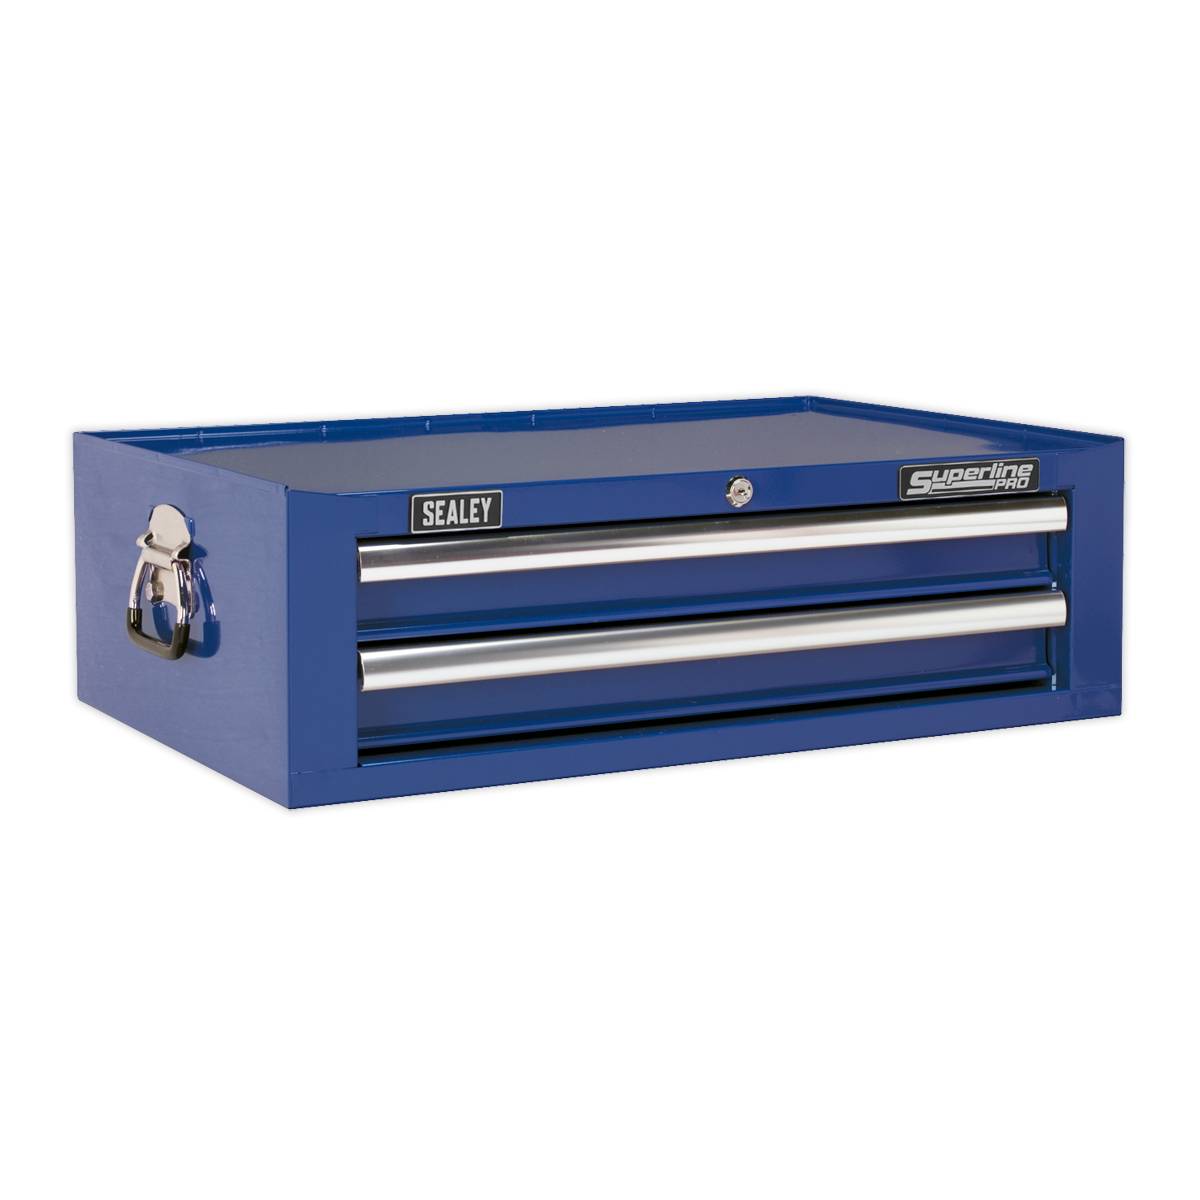 Tool Chest Combination 14 Drawer with Ball-Bearing Slides - Blue & 1179pc Tool Kit